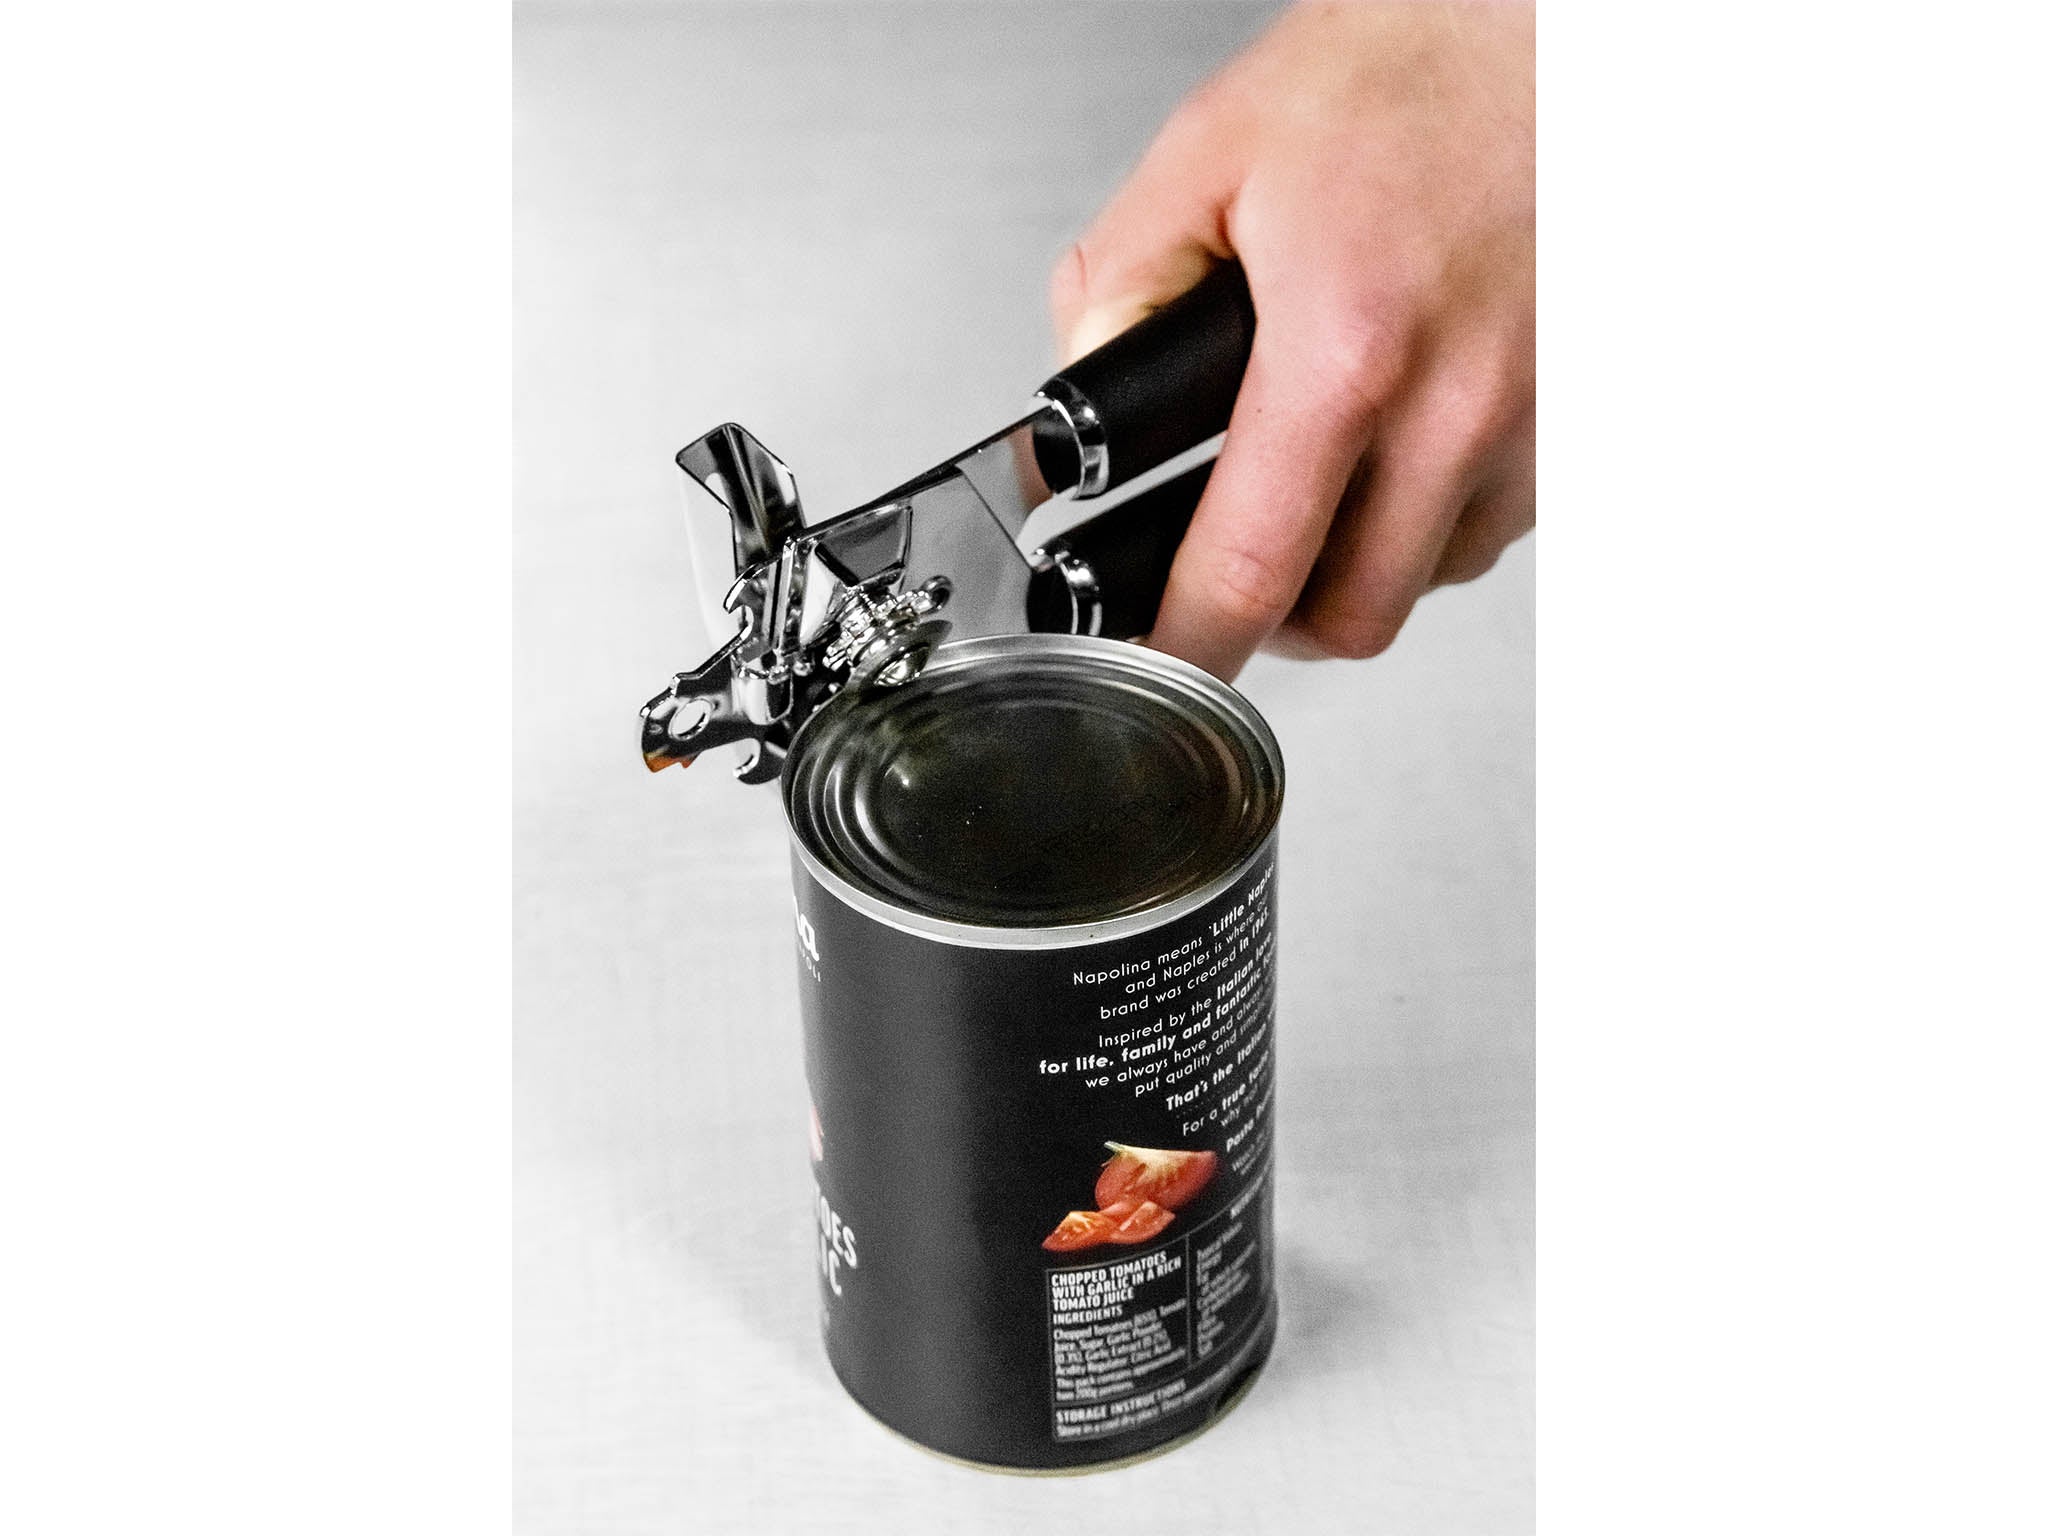 Heavy Duty Stainless Steel Tin Can Opener Cutter Handle Grip Kitchen Tools UK